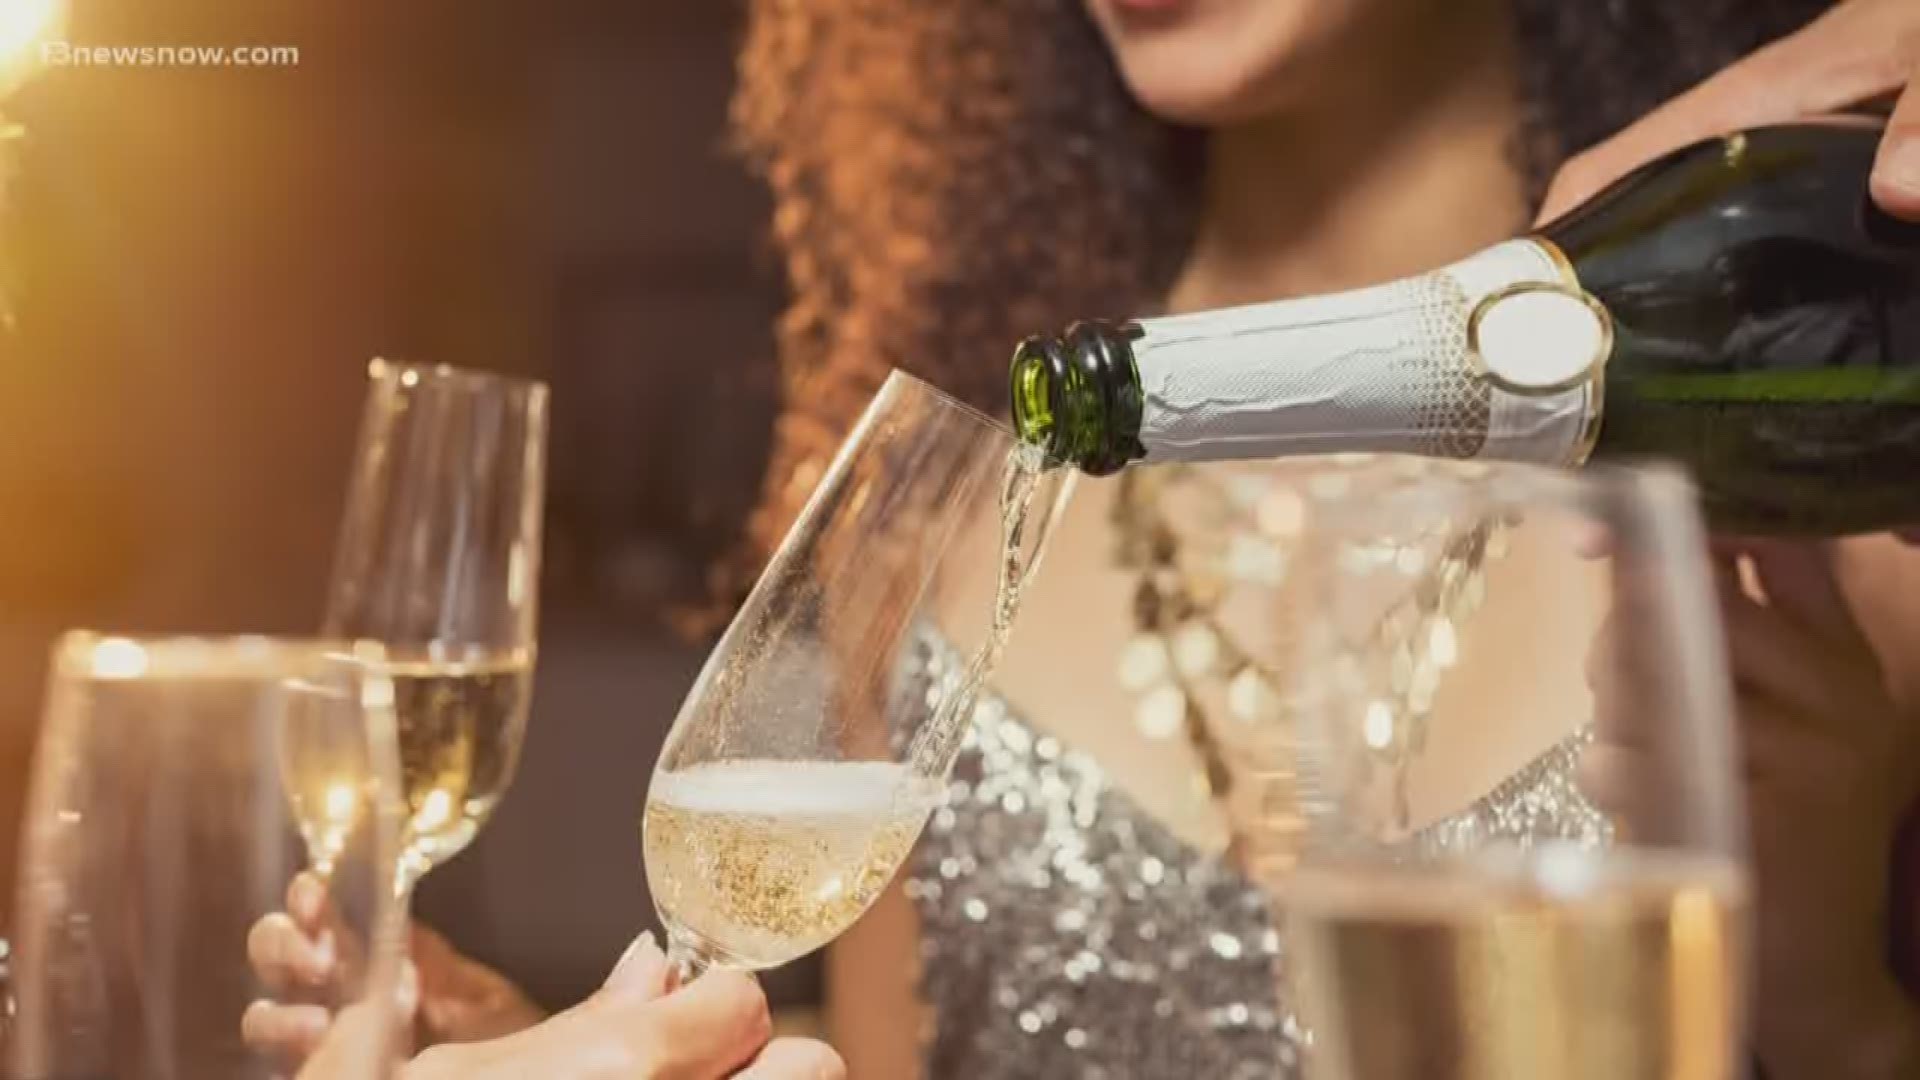 With so many choices, selecting the perfect wine for a romantic meal can seem overwhelming.  We have some help from wine expert Crystal Cameron-Schaad.